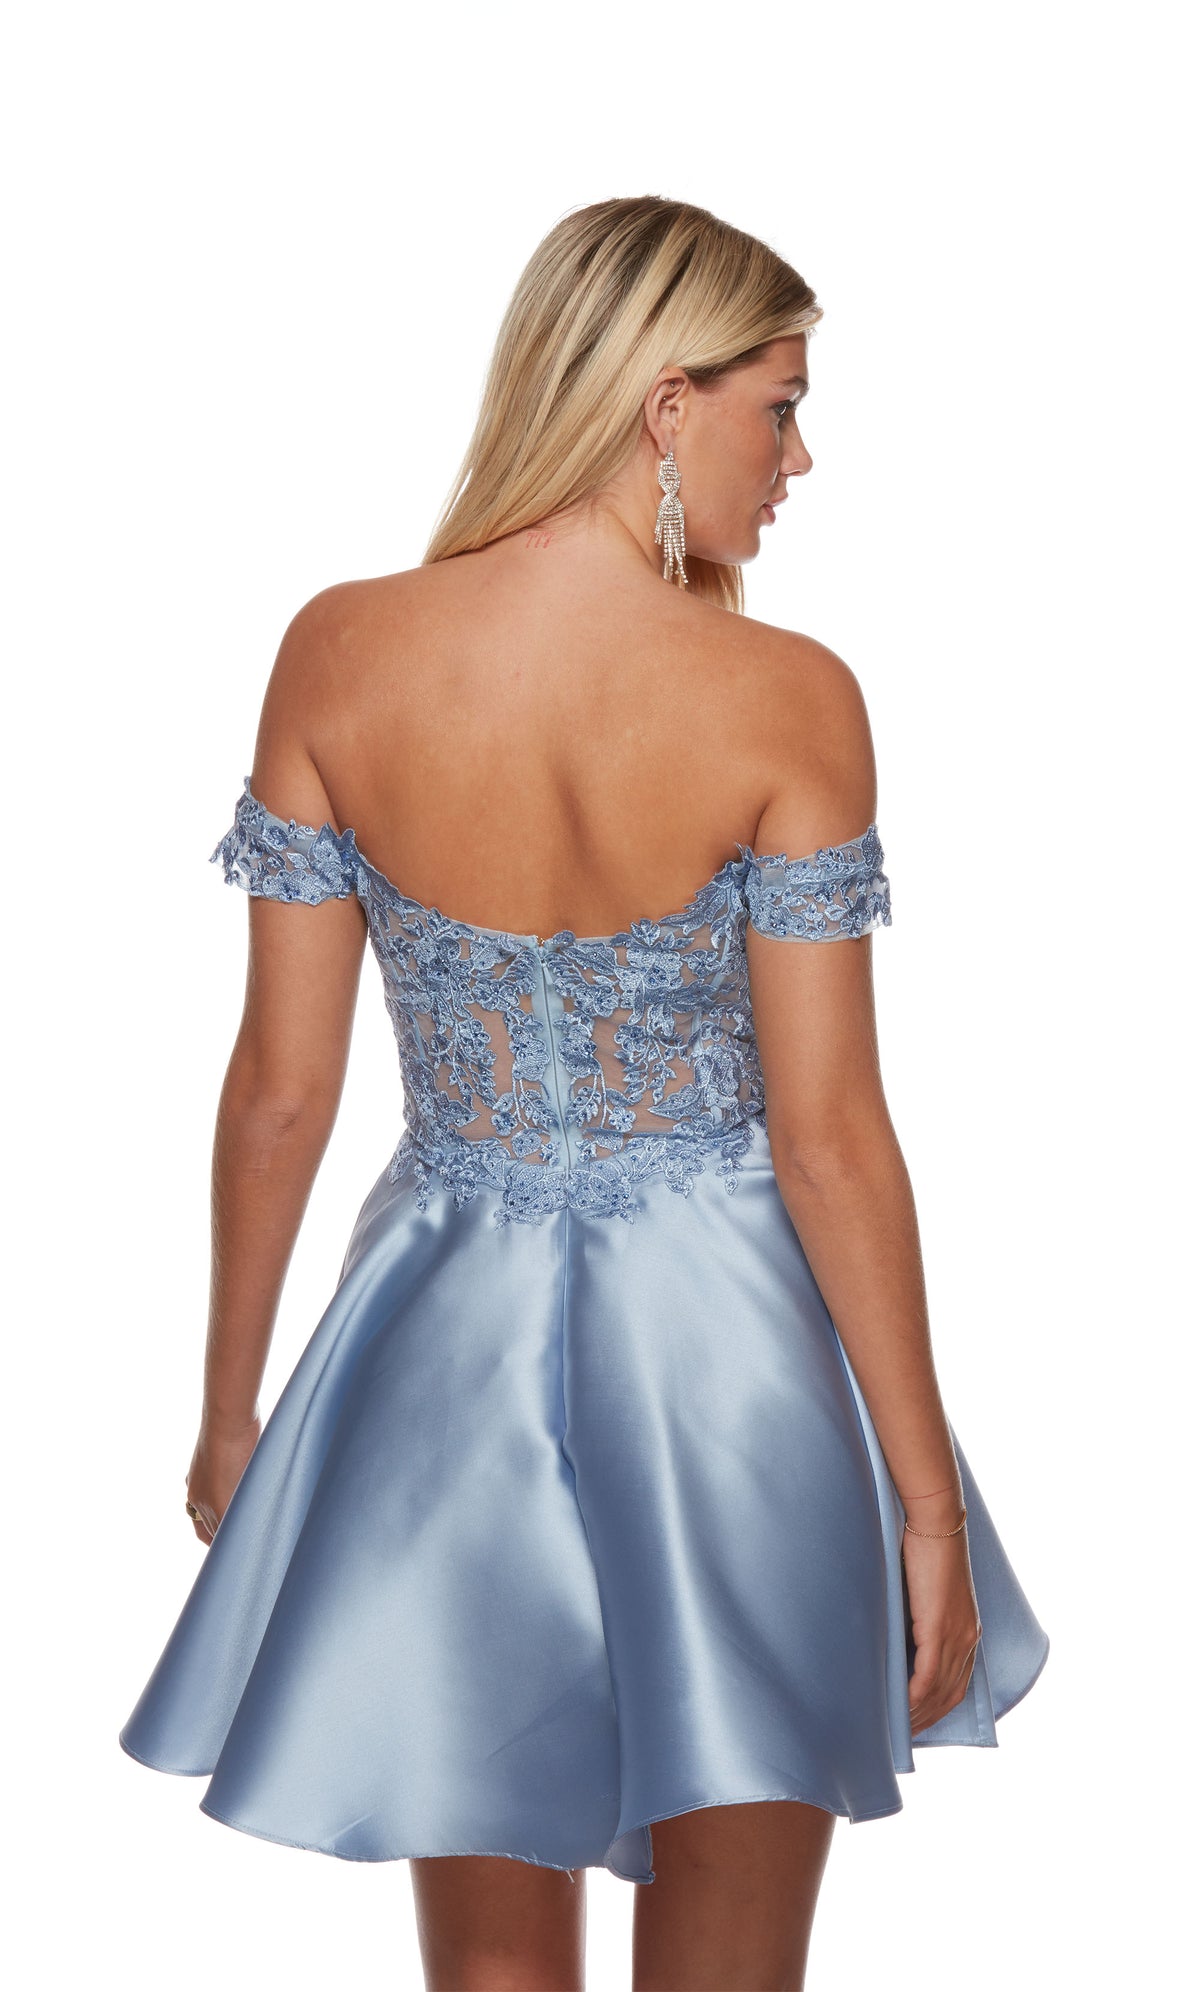 A Mikado flare dress with a zip-up back and sheer corset bodice adorned with floral lace appliques in the color french blue.